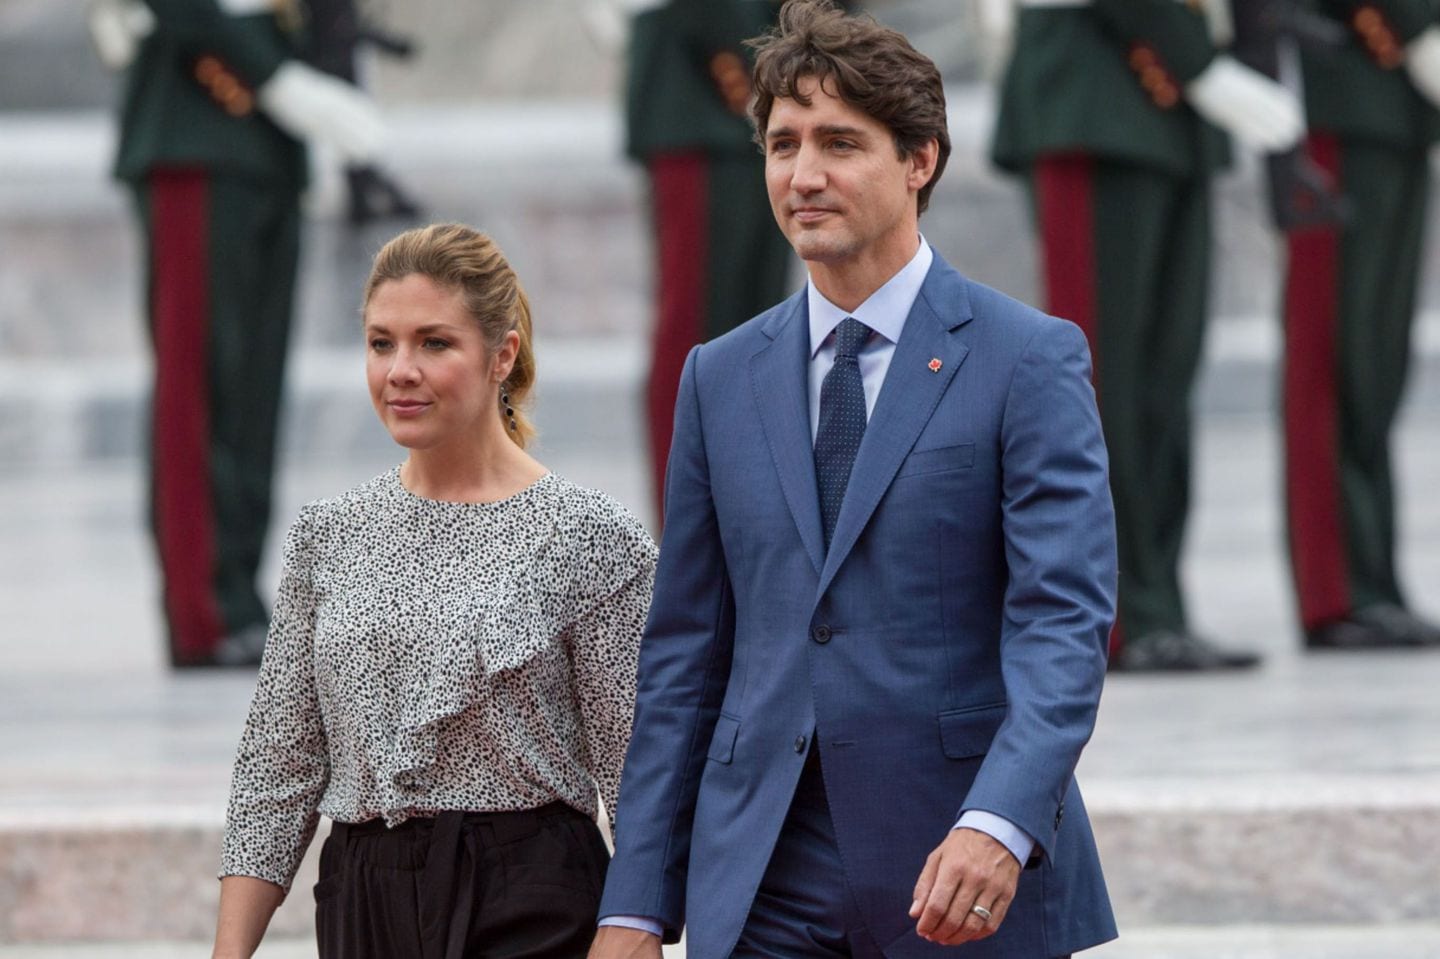 Justin Trudeau Divorce Rumors, What Are The Allegations Against The ... image